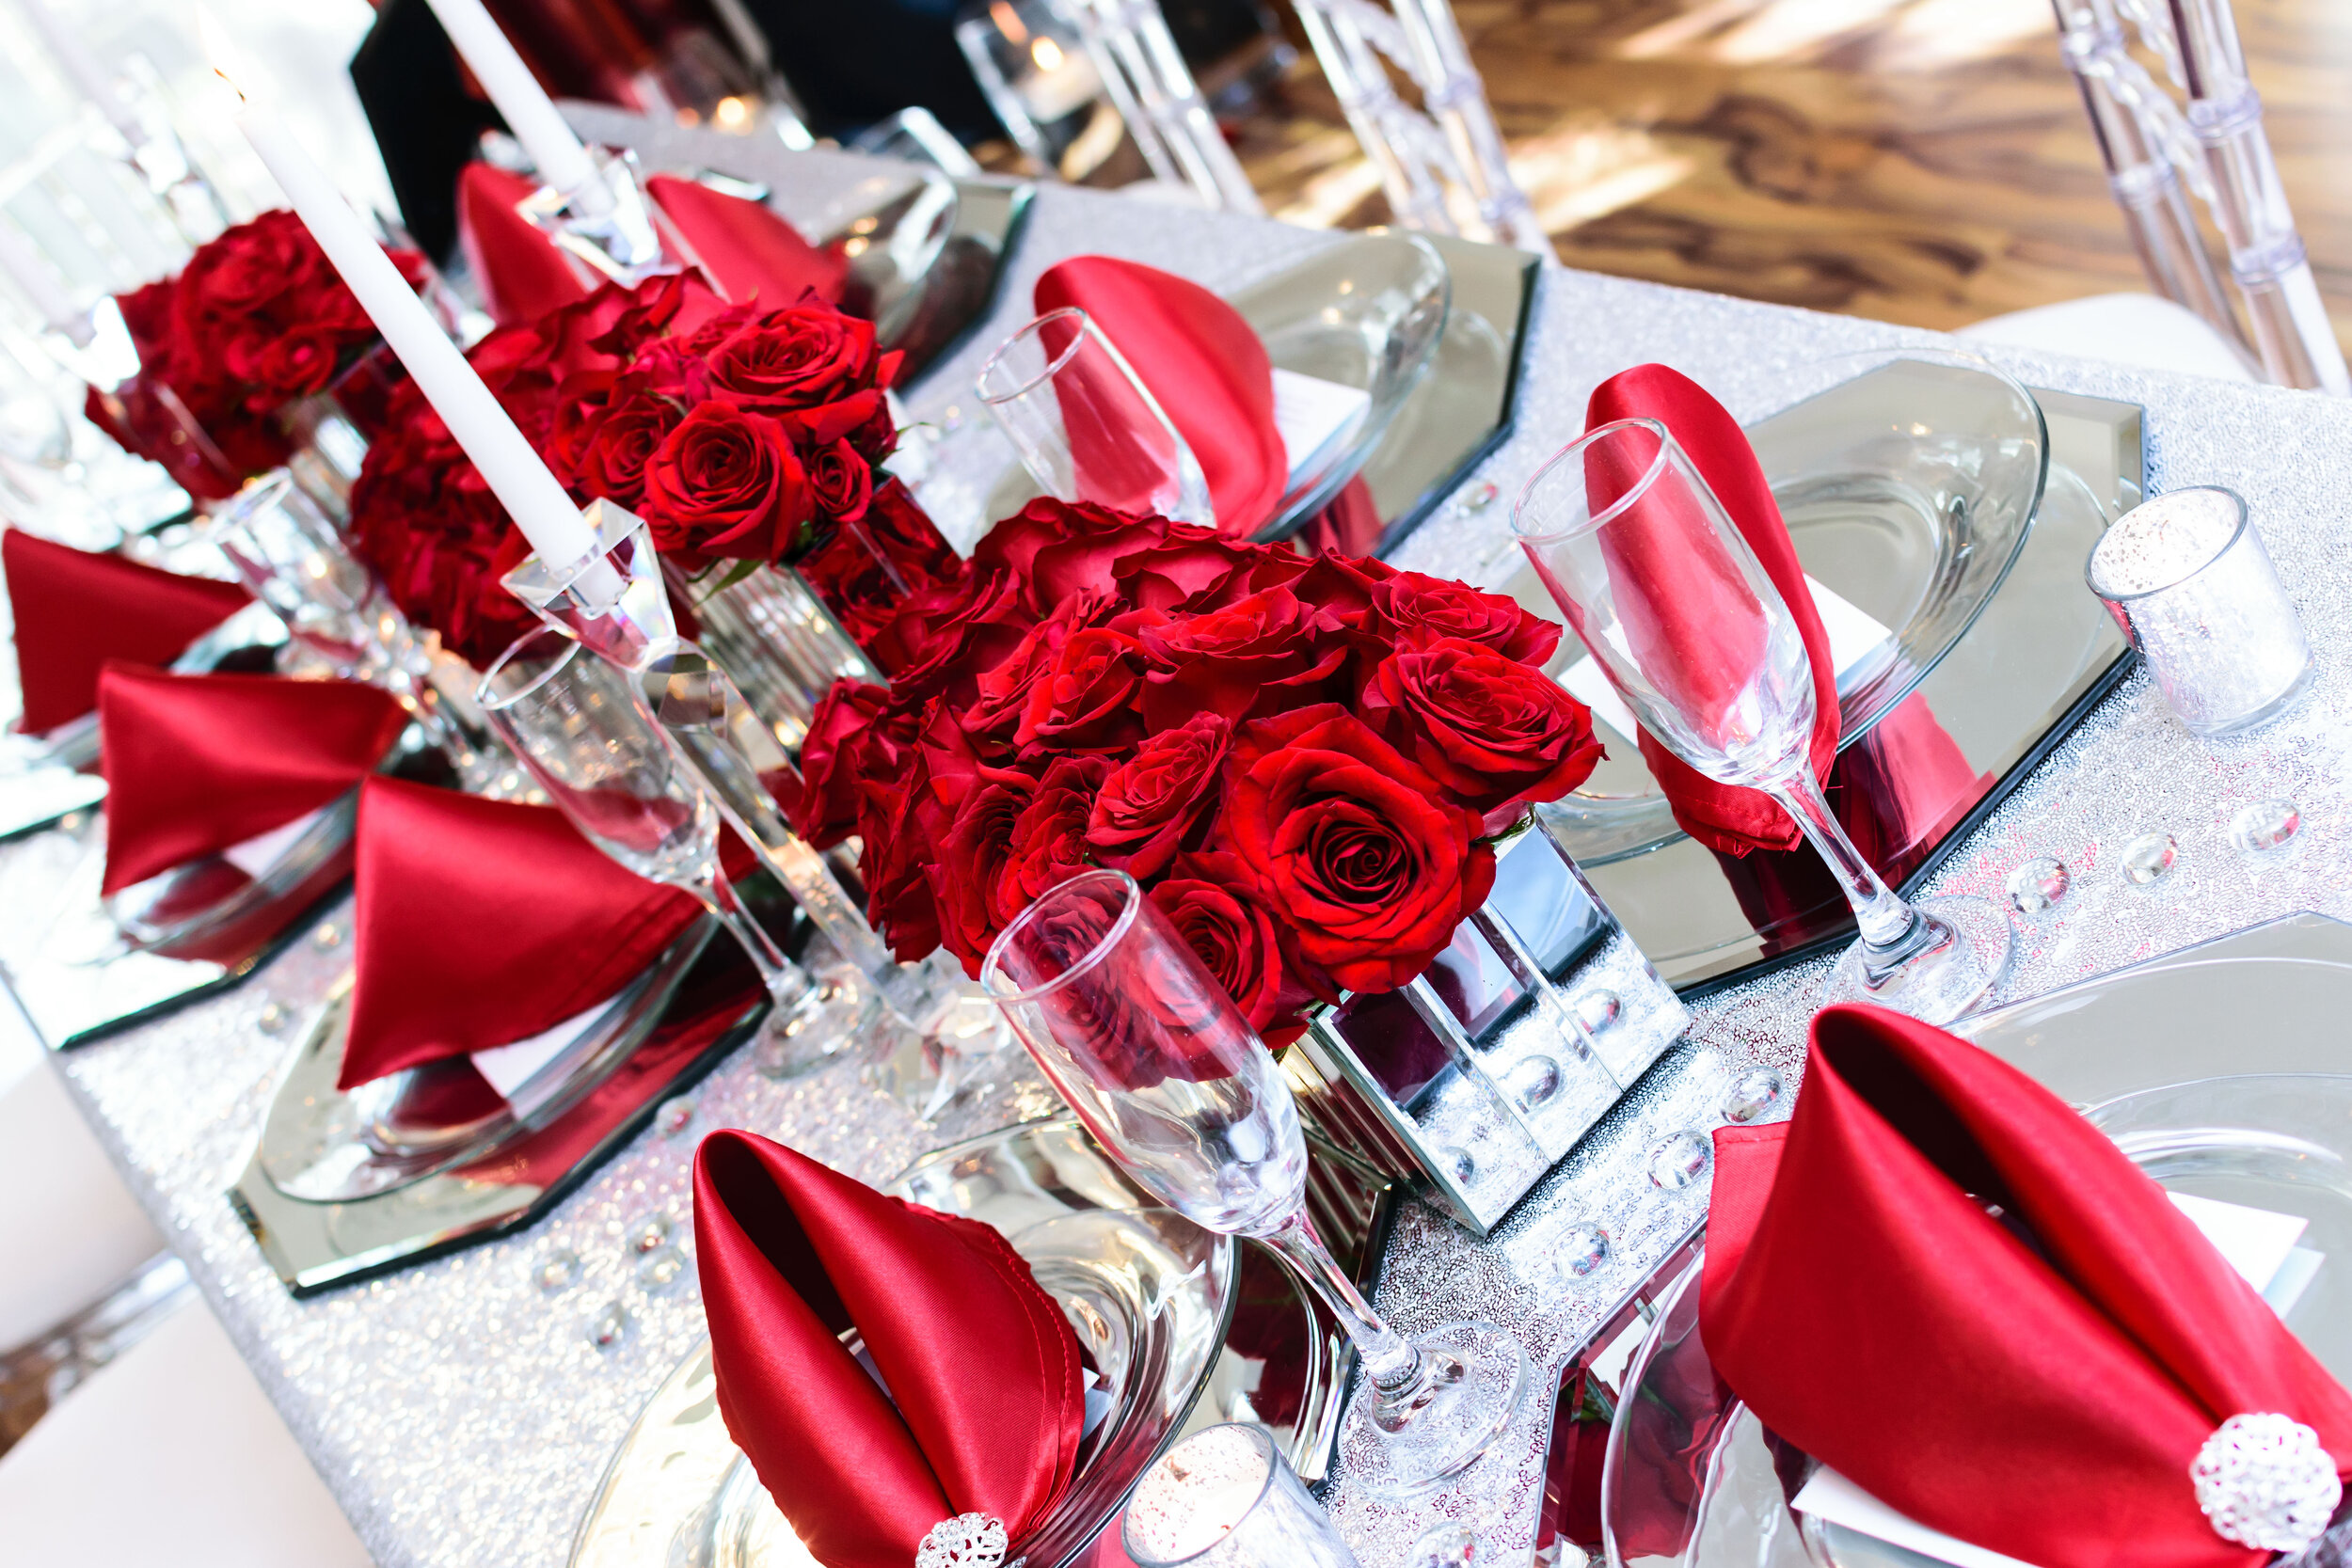 Event Planning and Interior Decorating